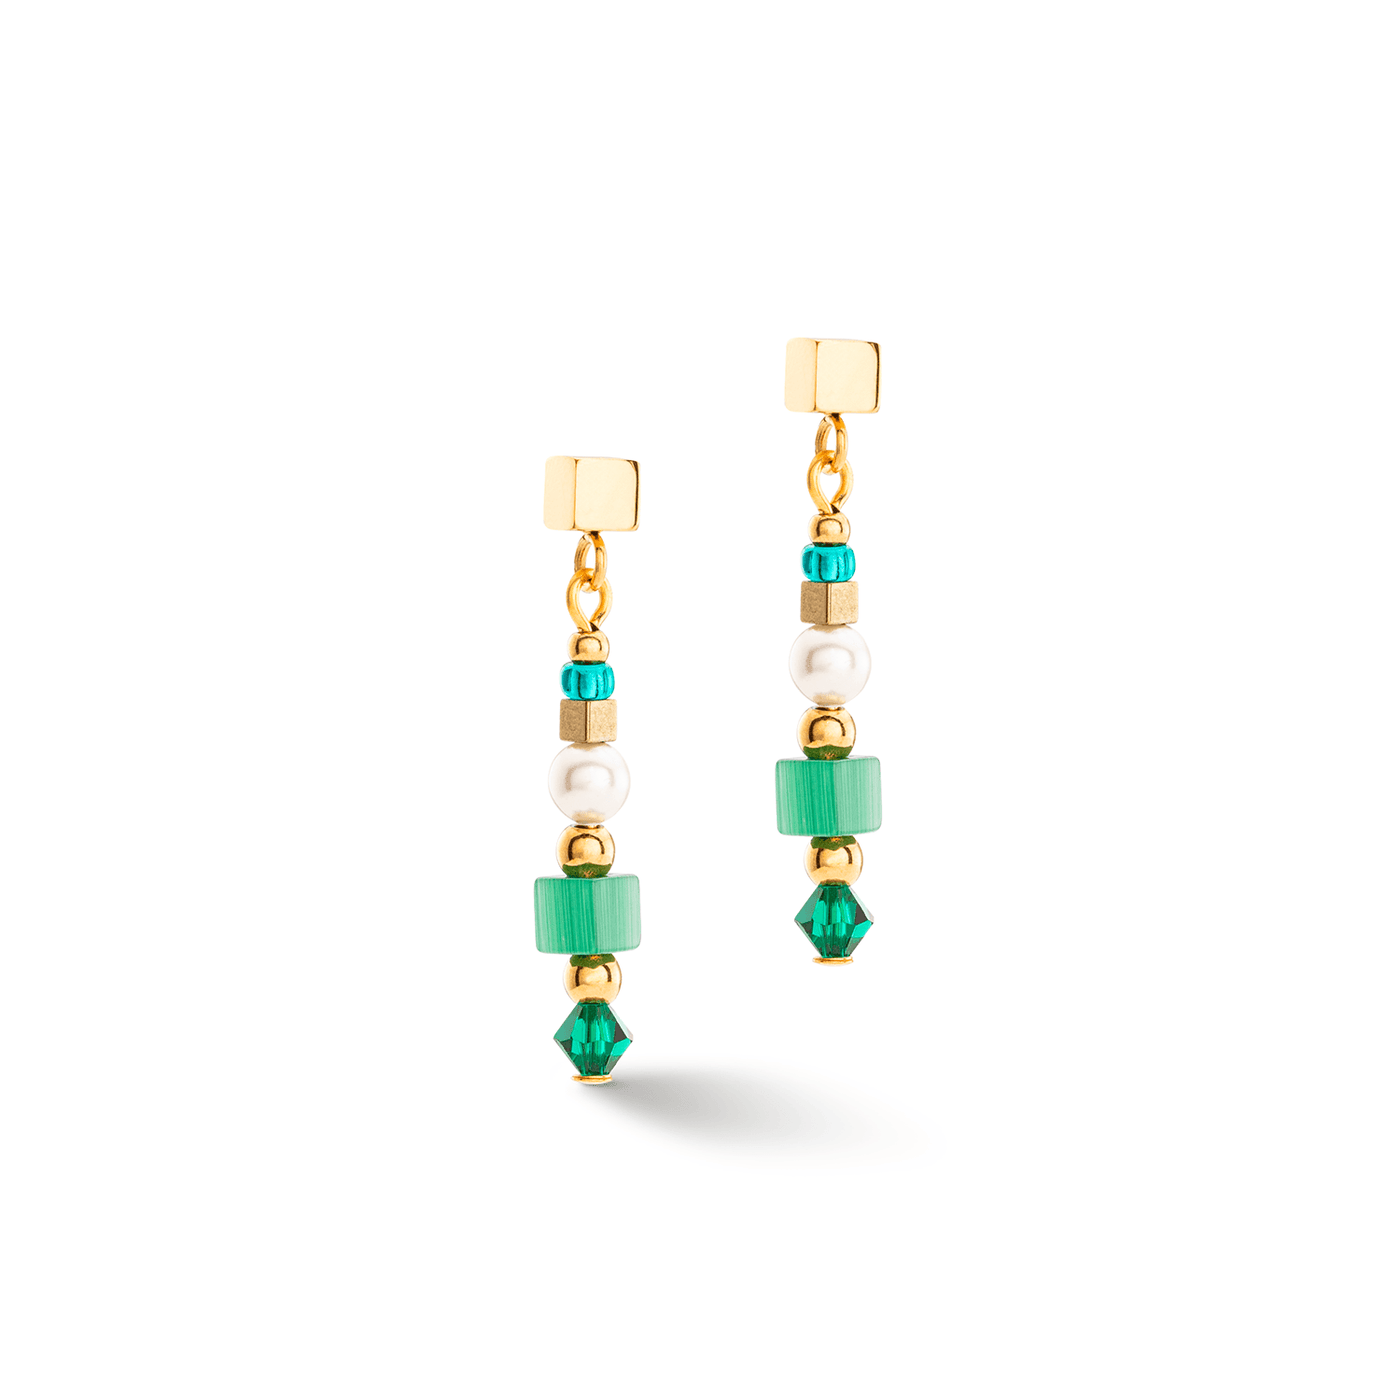 Coeur De Lion Square Stripes Gold and Green Earrings - Rococo Jewellery